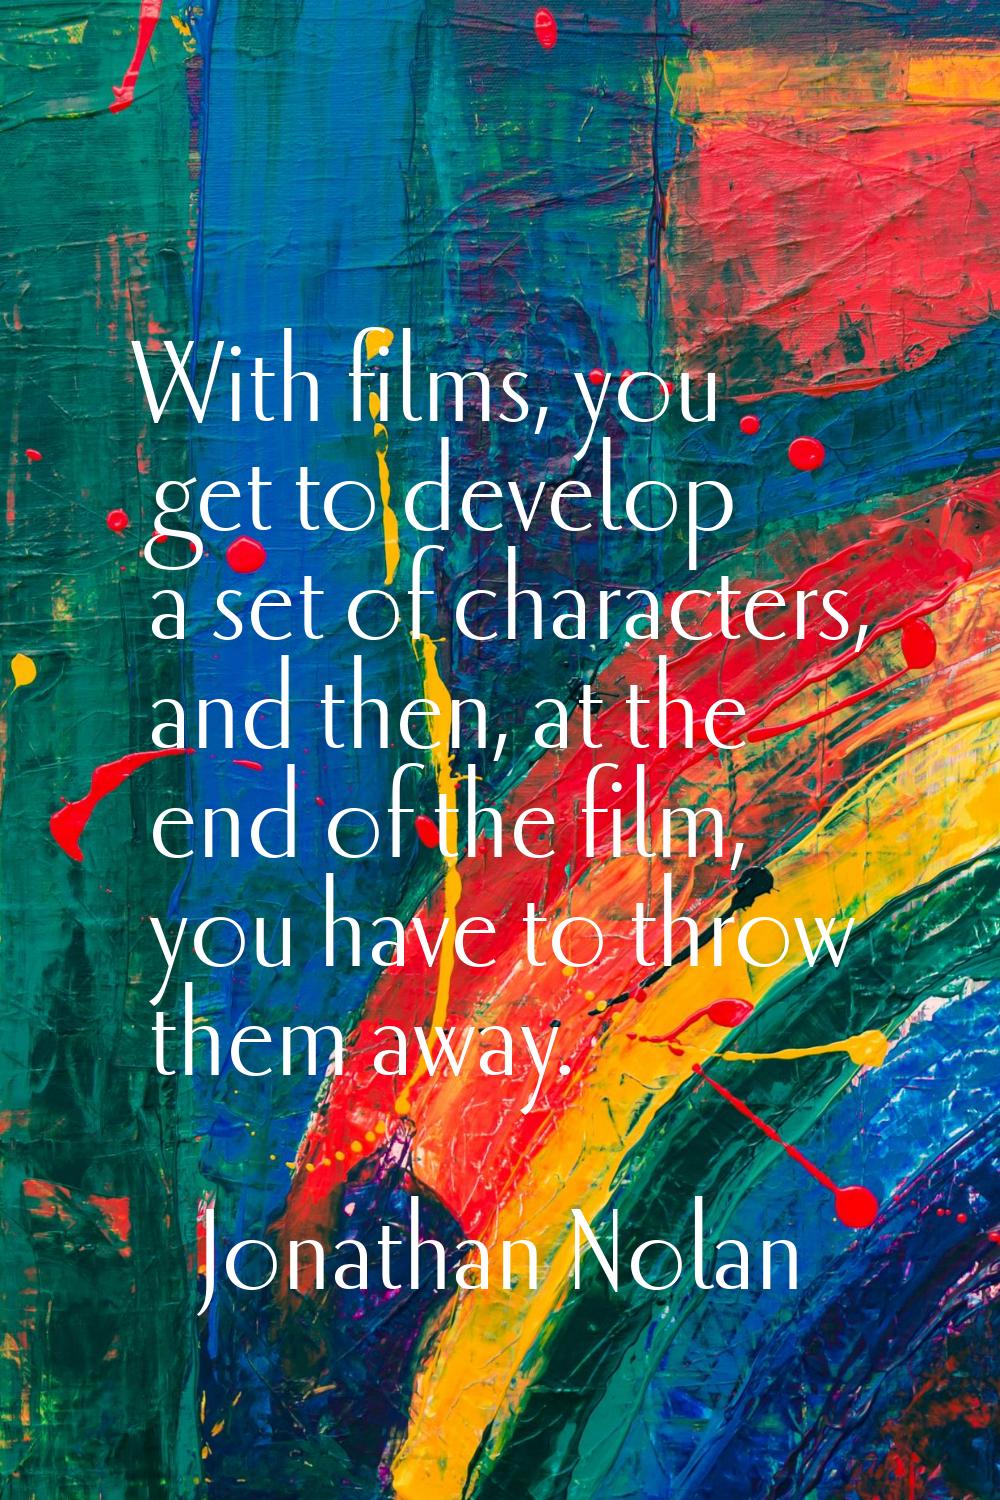 With films, you get to develop a set of characters, and then, at the end of the film, you have to t